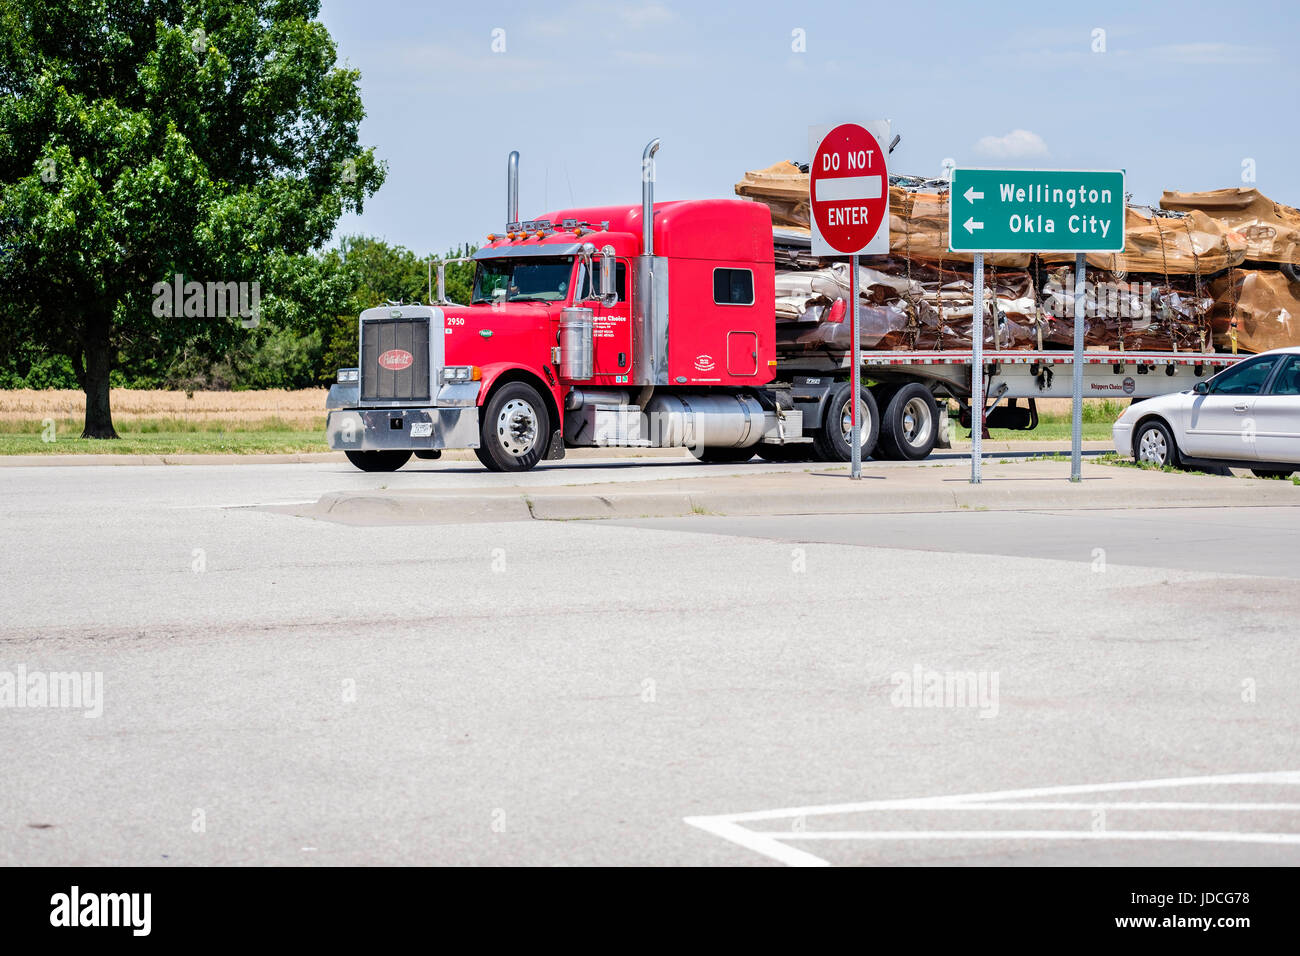 A semi-truck hauling crushed automobiles pulling into Belle Plains, a rest stop on I-35 south of Wichita, Kansas, USA. Stock Photo